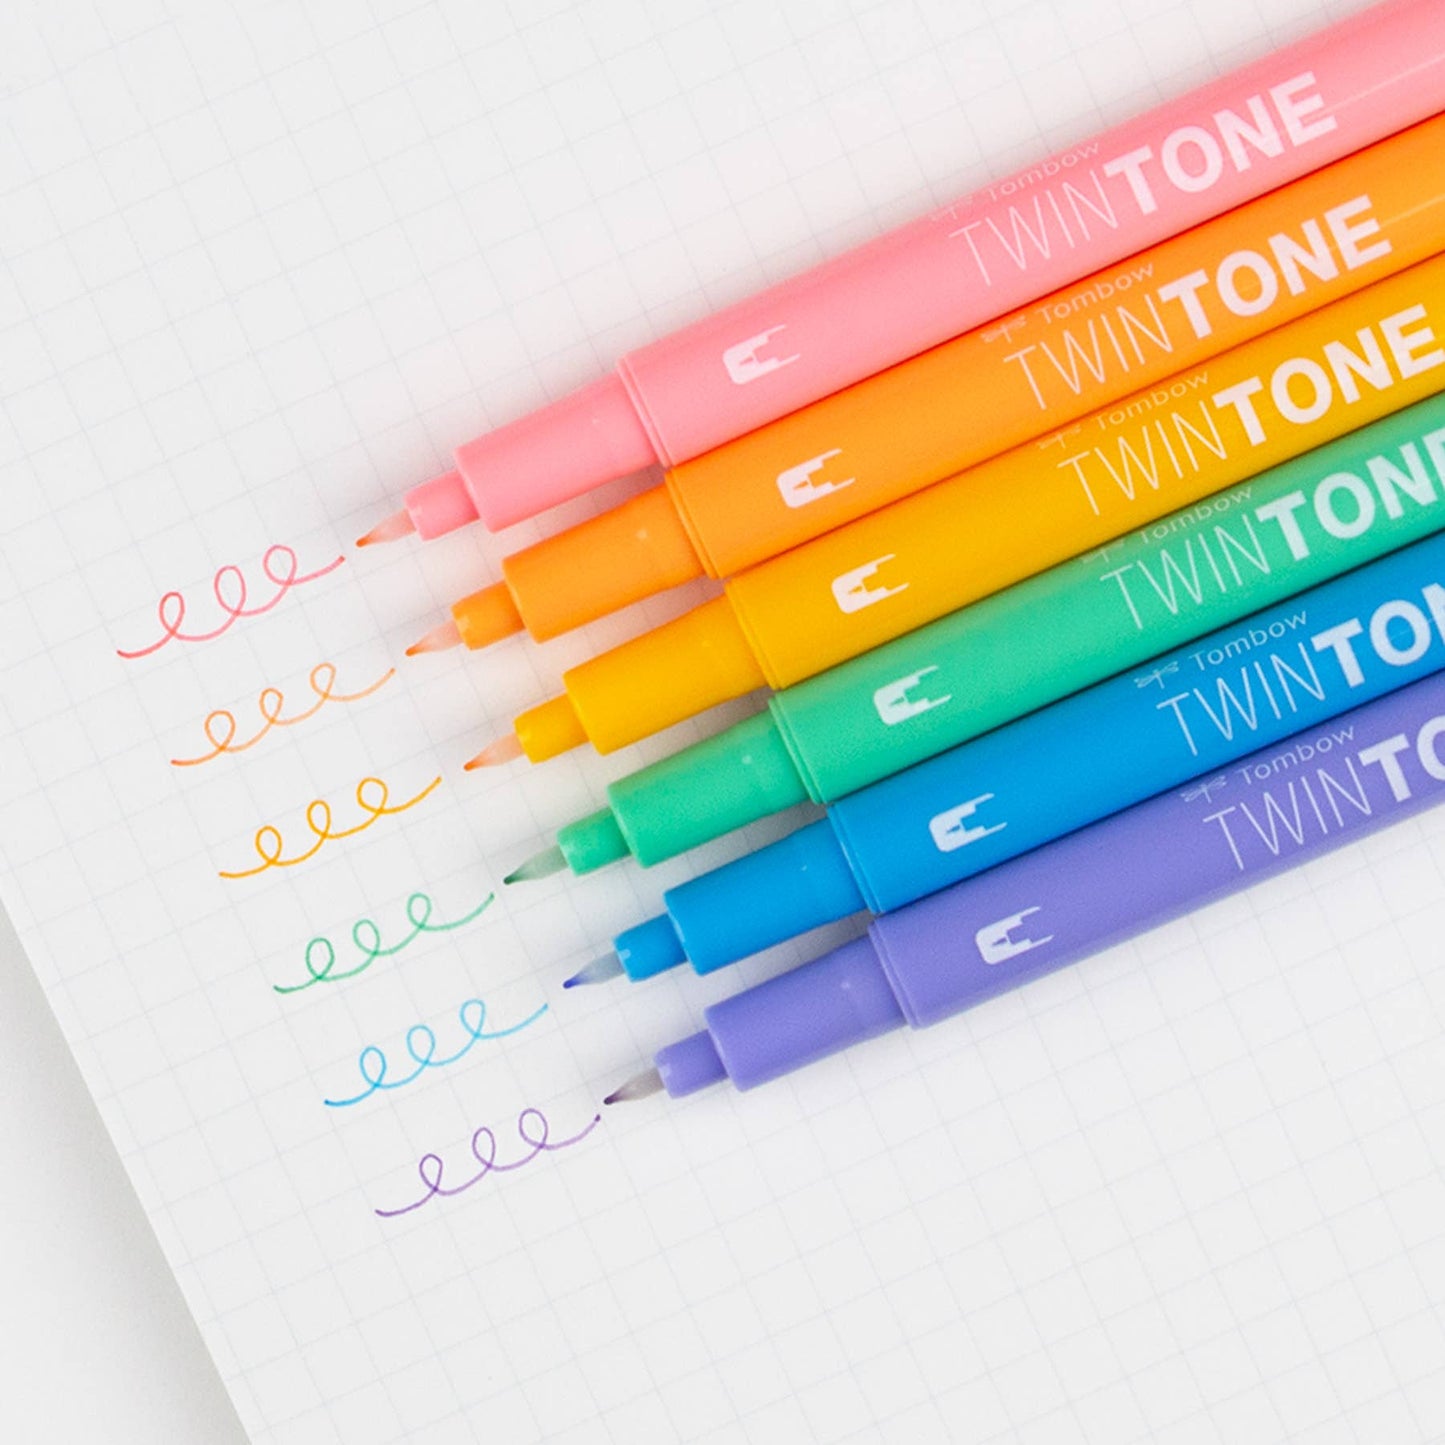 Tombow - TwinTone Marker Set, 6-Pack Pastel